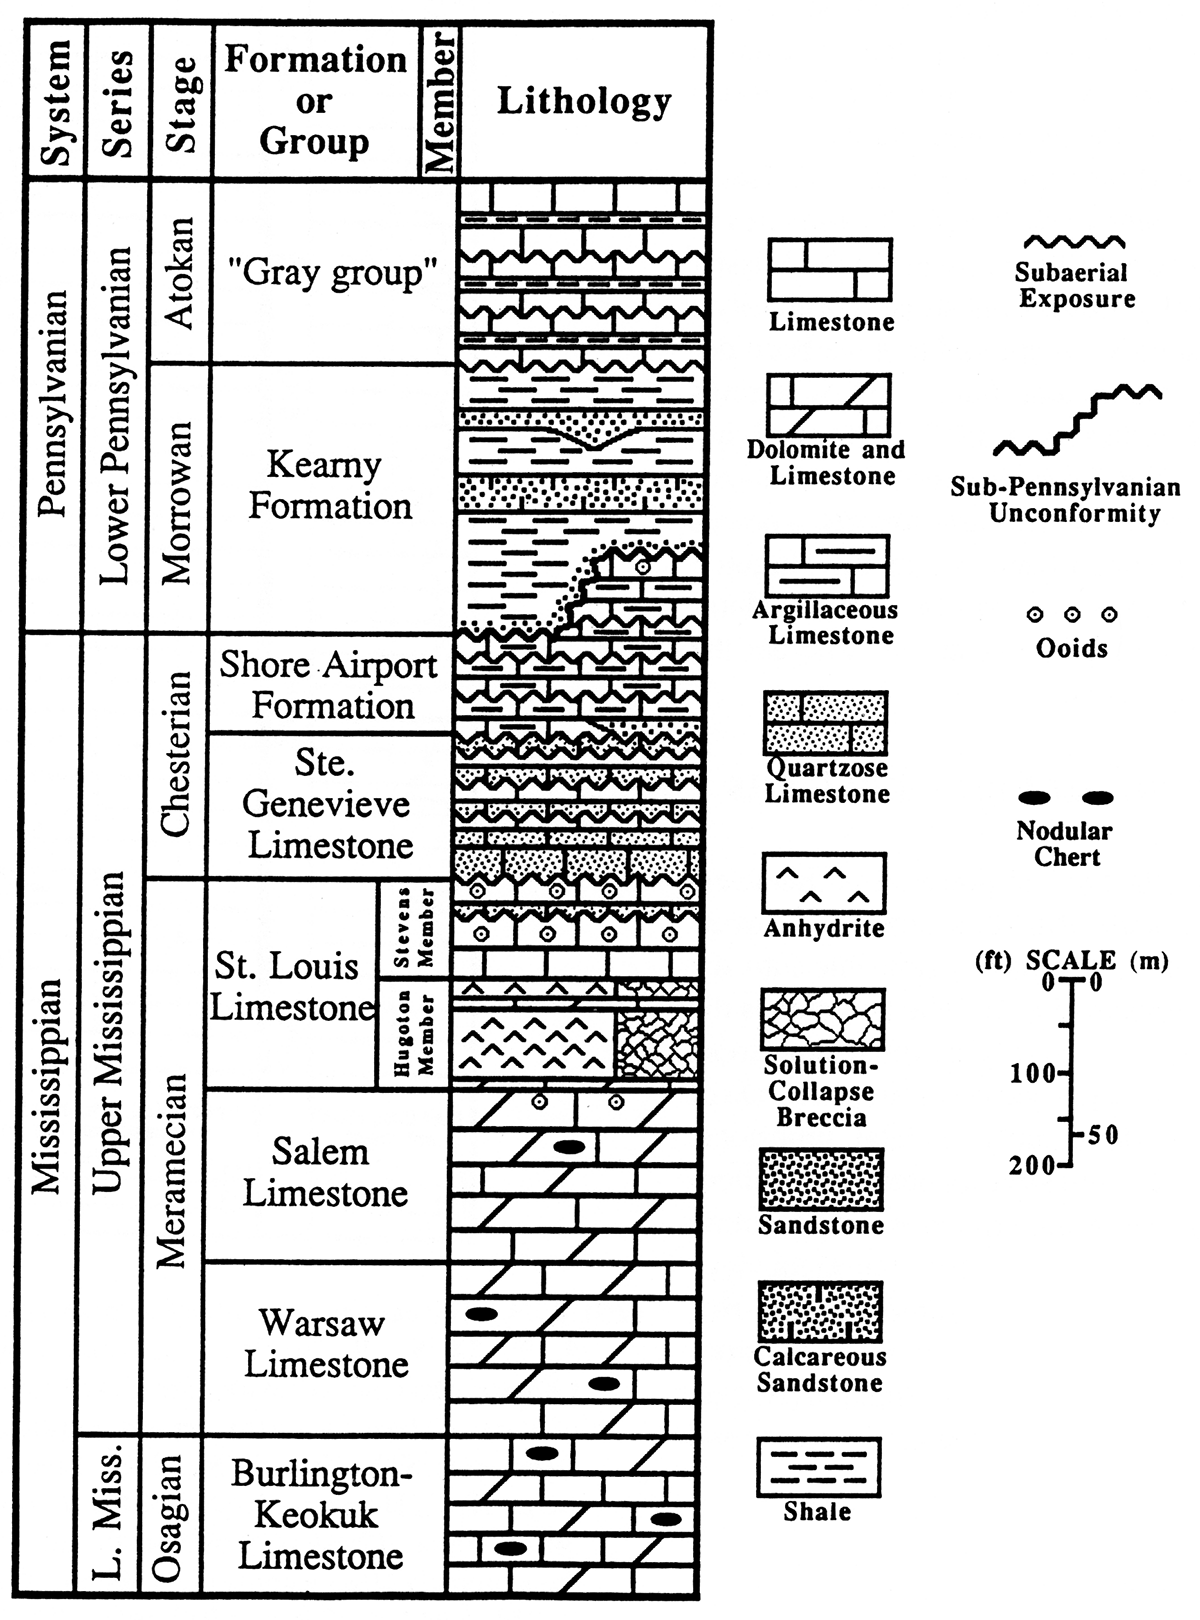 Upper Mississippian lithostratigraphic units in the Hugoton embayment of the Anadarko basin in southwestern Kansas.